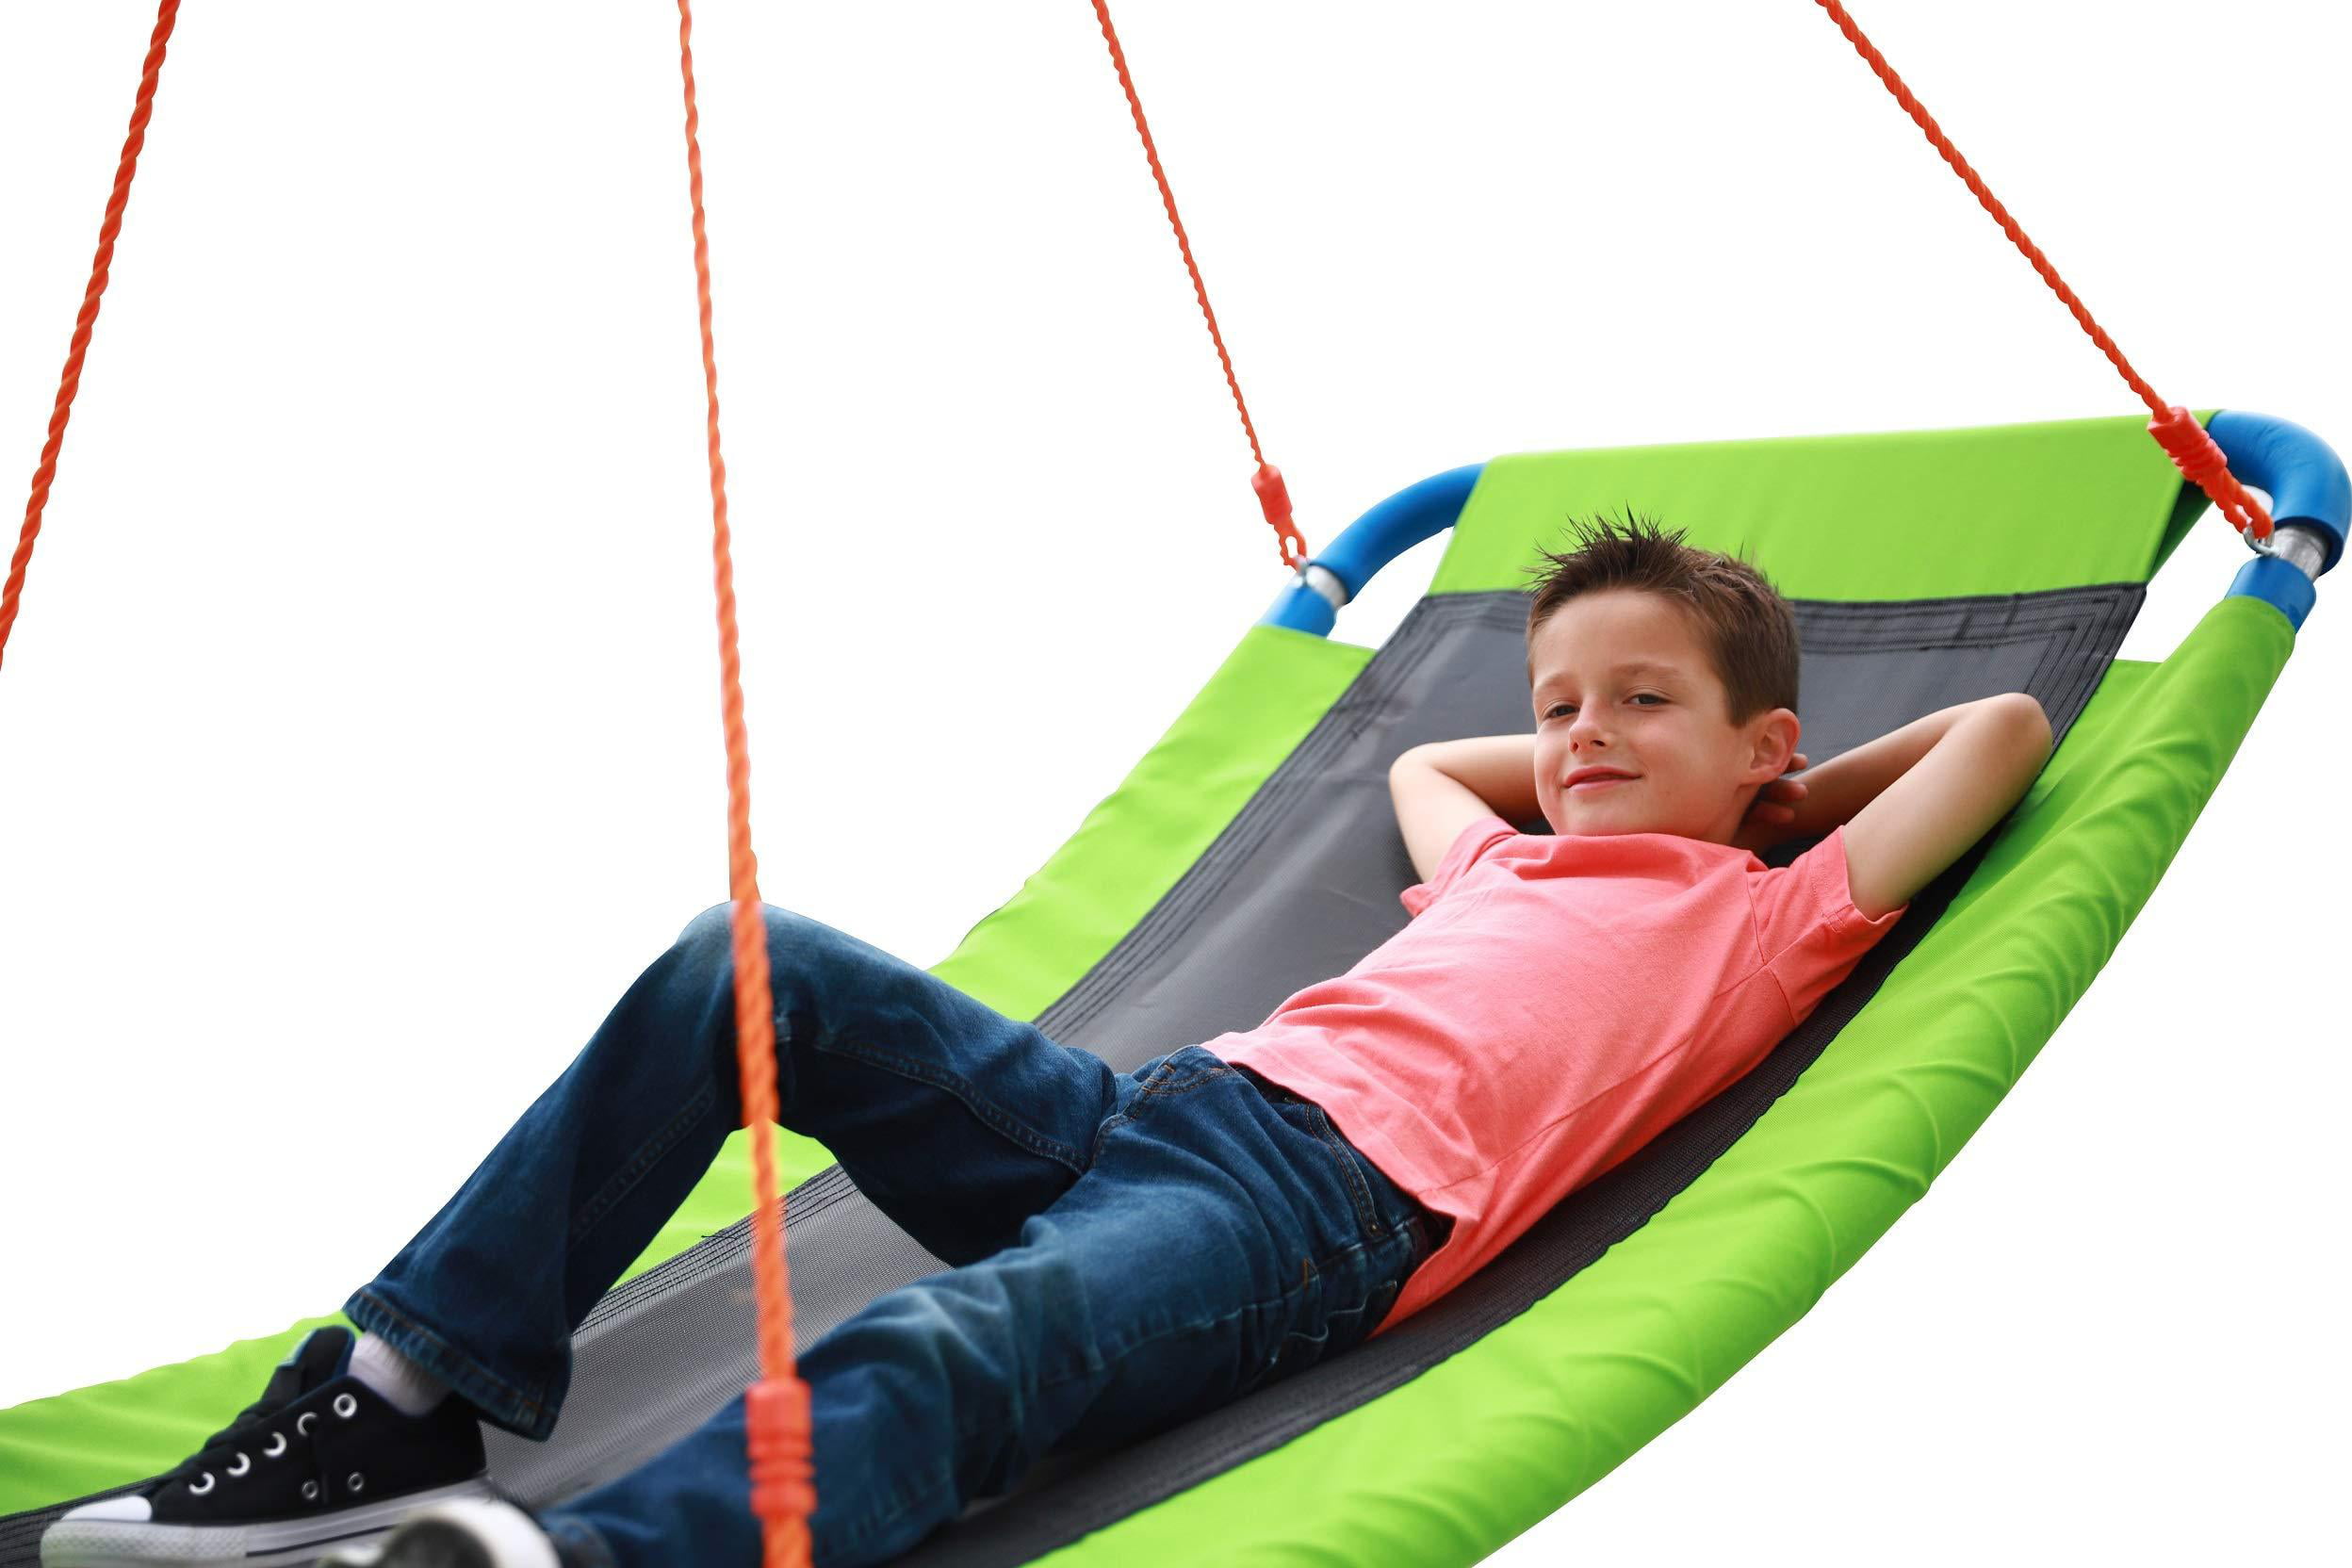 30 inches Durable Steel Frame Adjustable Ropes Waterproof Spinner Saucer Swing Easy Install Kids Swing Sets for Backyard SLIDEWHIZZER Round Tree Swing Fun for Kids 